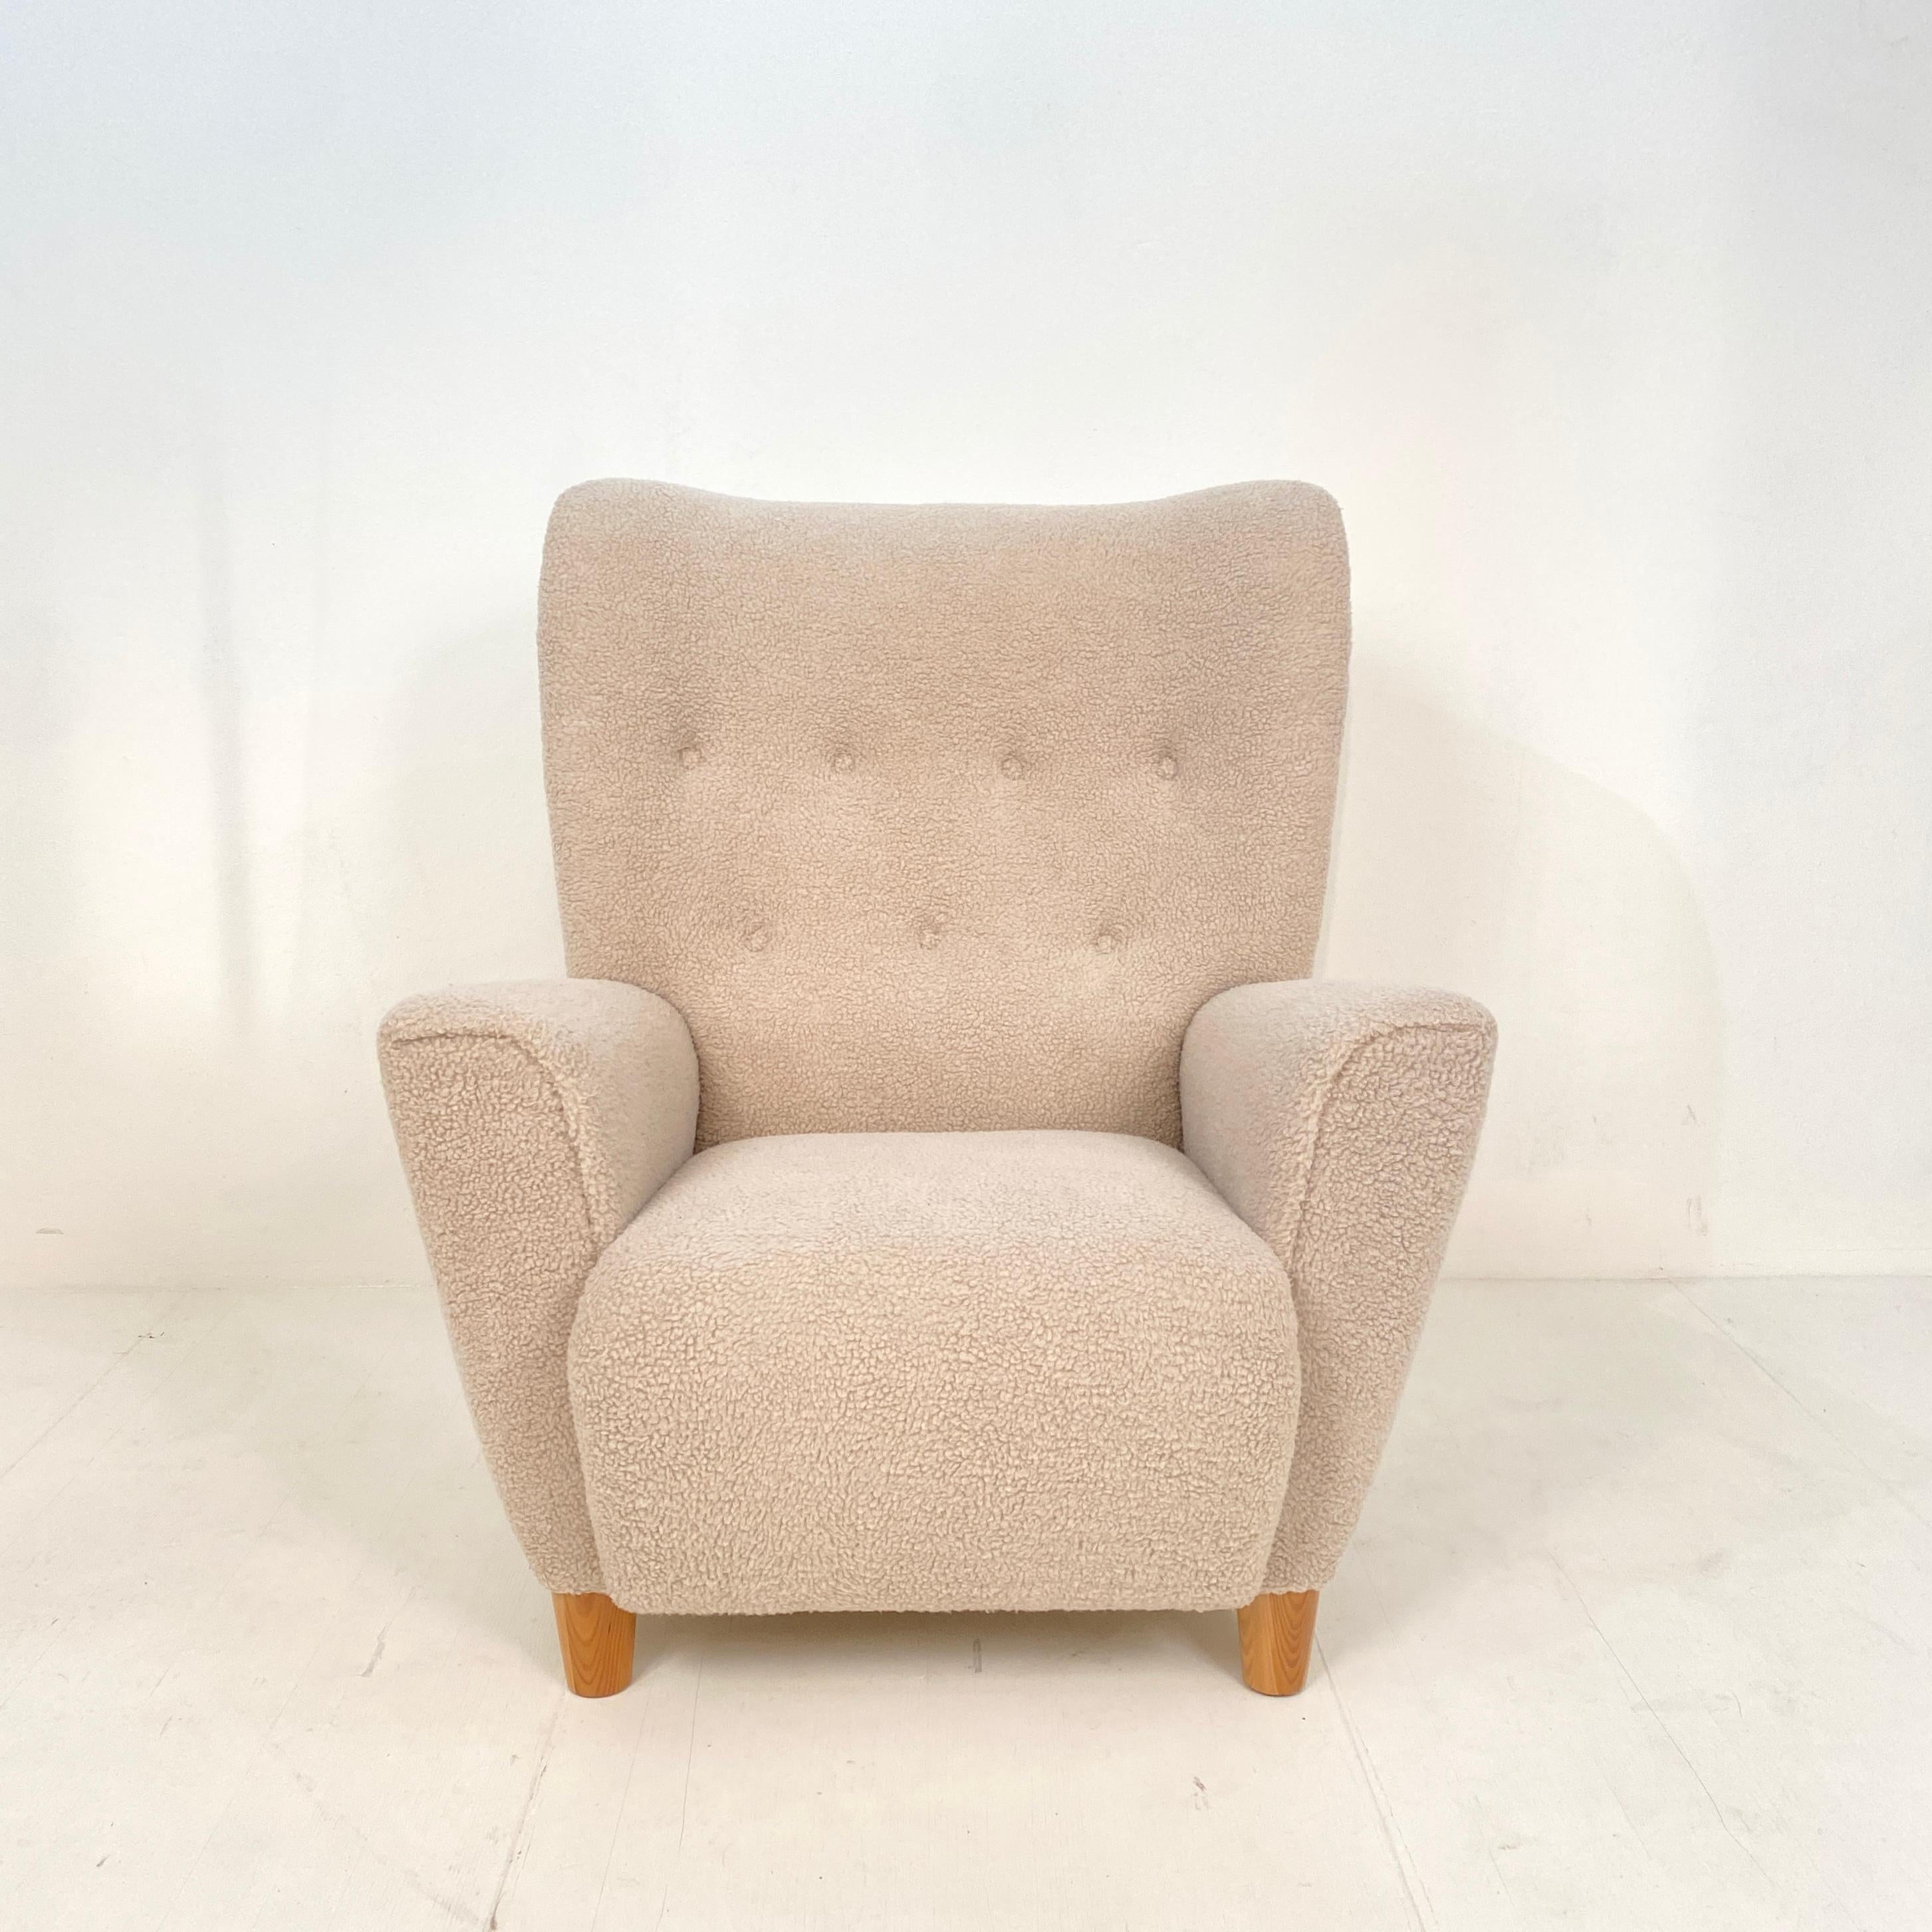 This beautiful mid century Danish high back wing chair or armchair was made around 1970.
It is the style of Flemming Lassen.
It was recently re-upholstered in a light beige shearling fabric. The chair is very comfortable and in great condition.
A